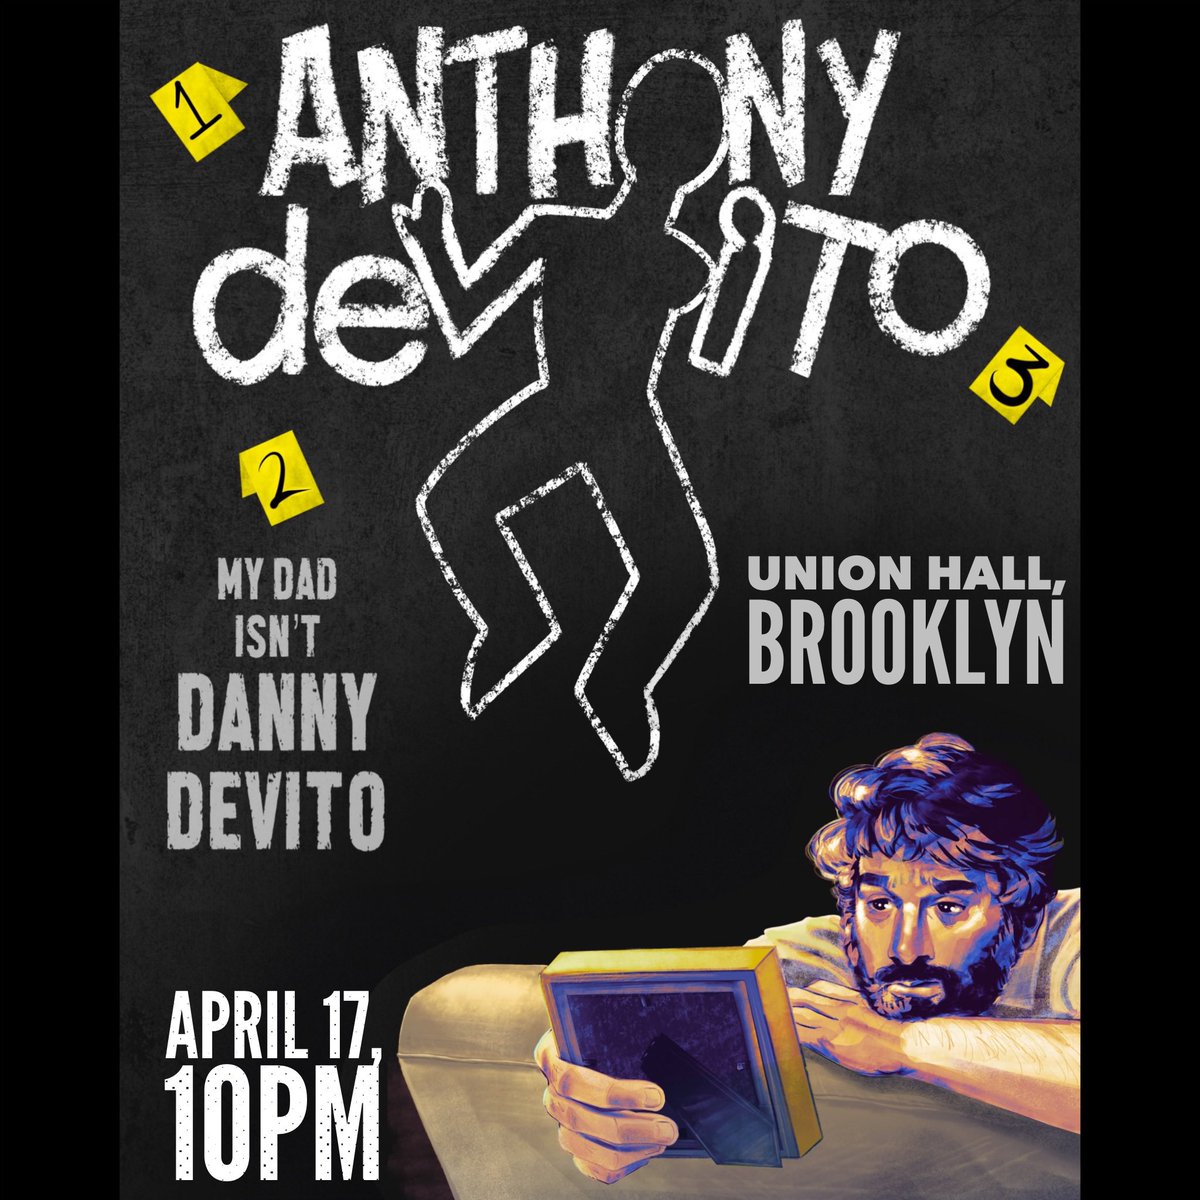 Brooklyn! I’m doing my solo show @UnionHallNY April 17 at 10pm! Come see a stand up/storytelling hour about true crime. I say why not! Grab tickets in my bio!